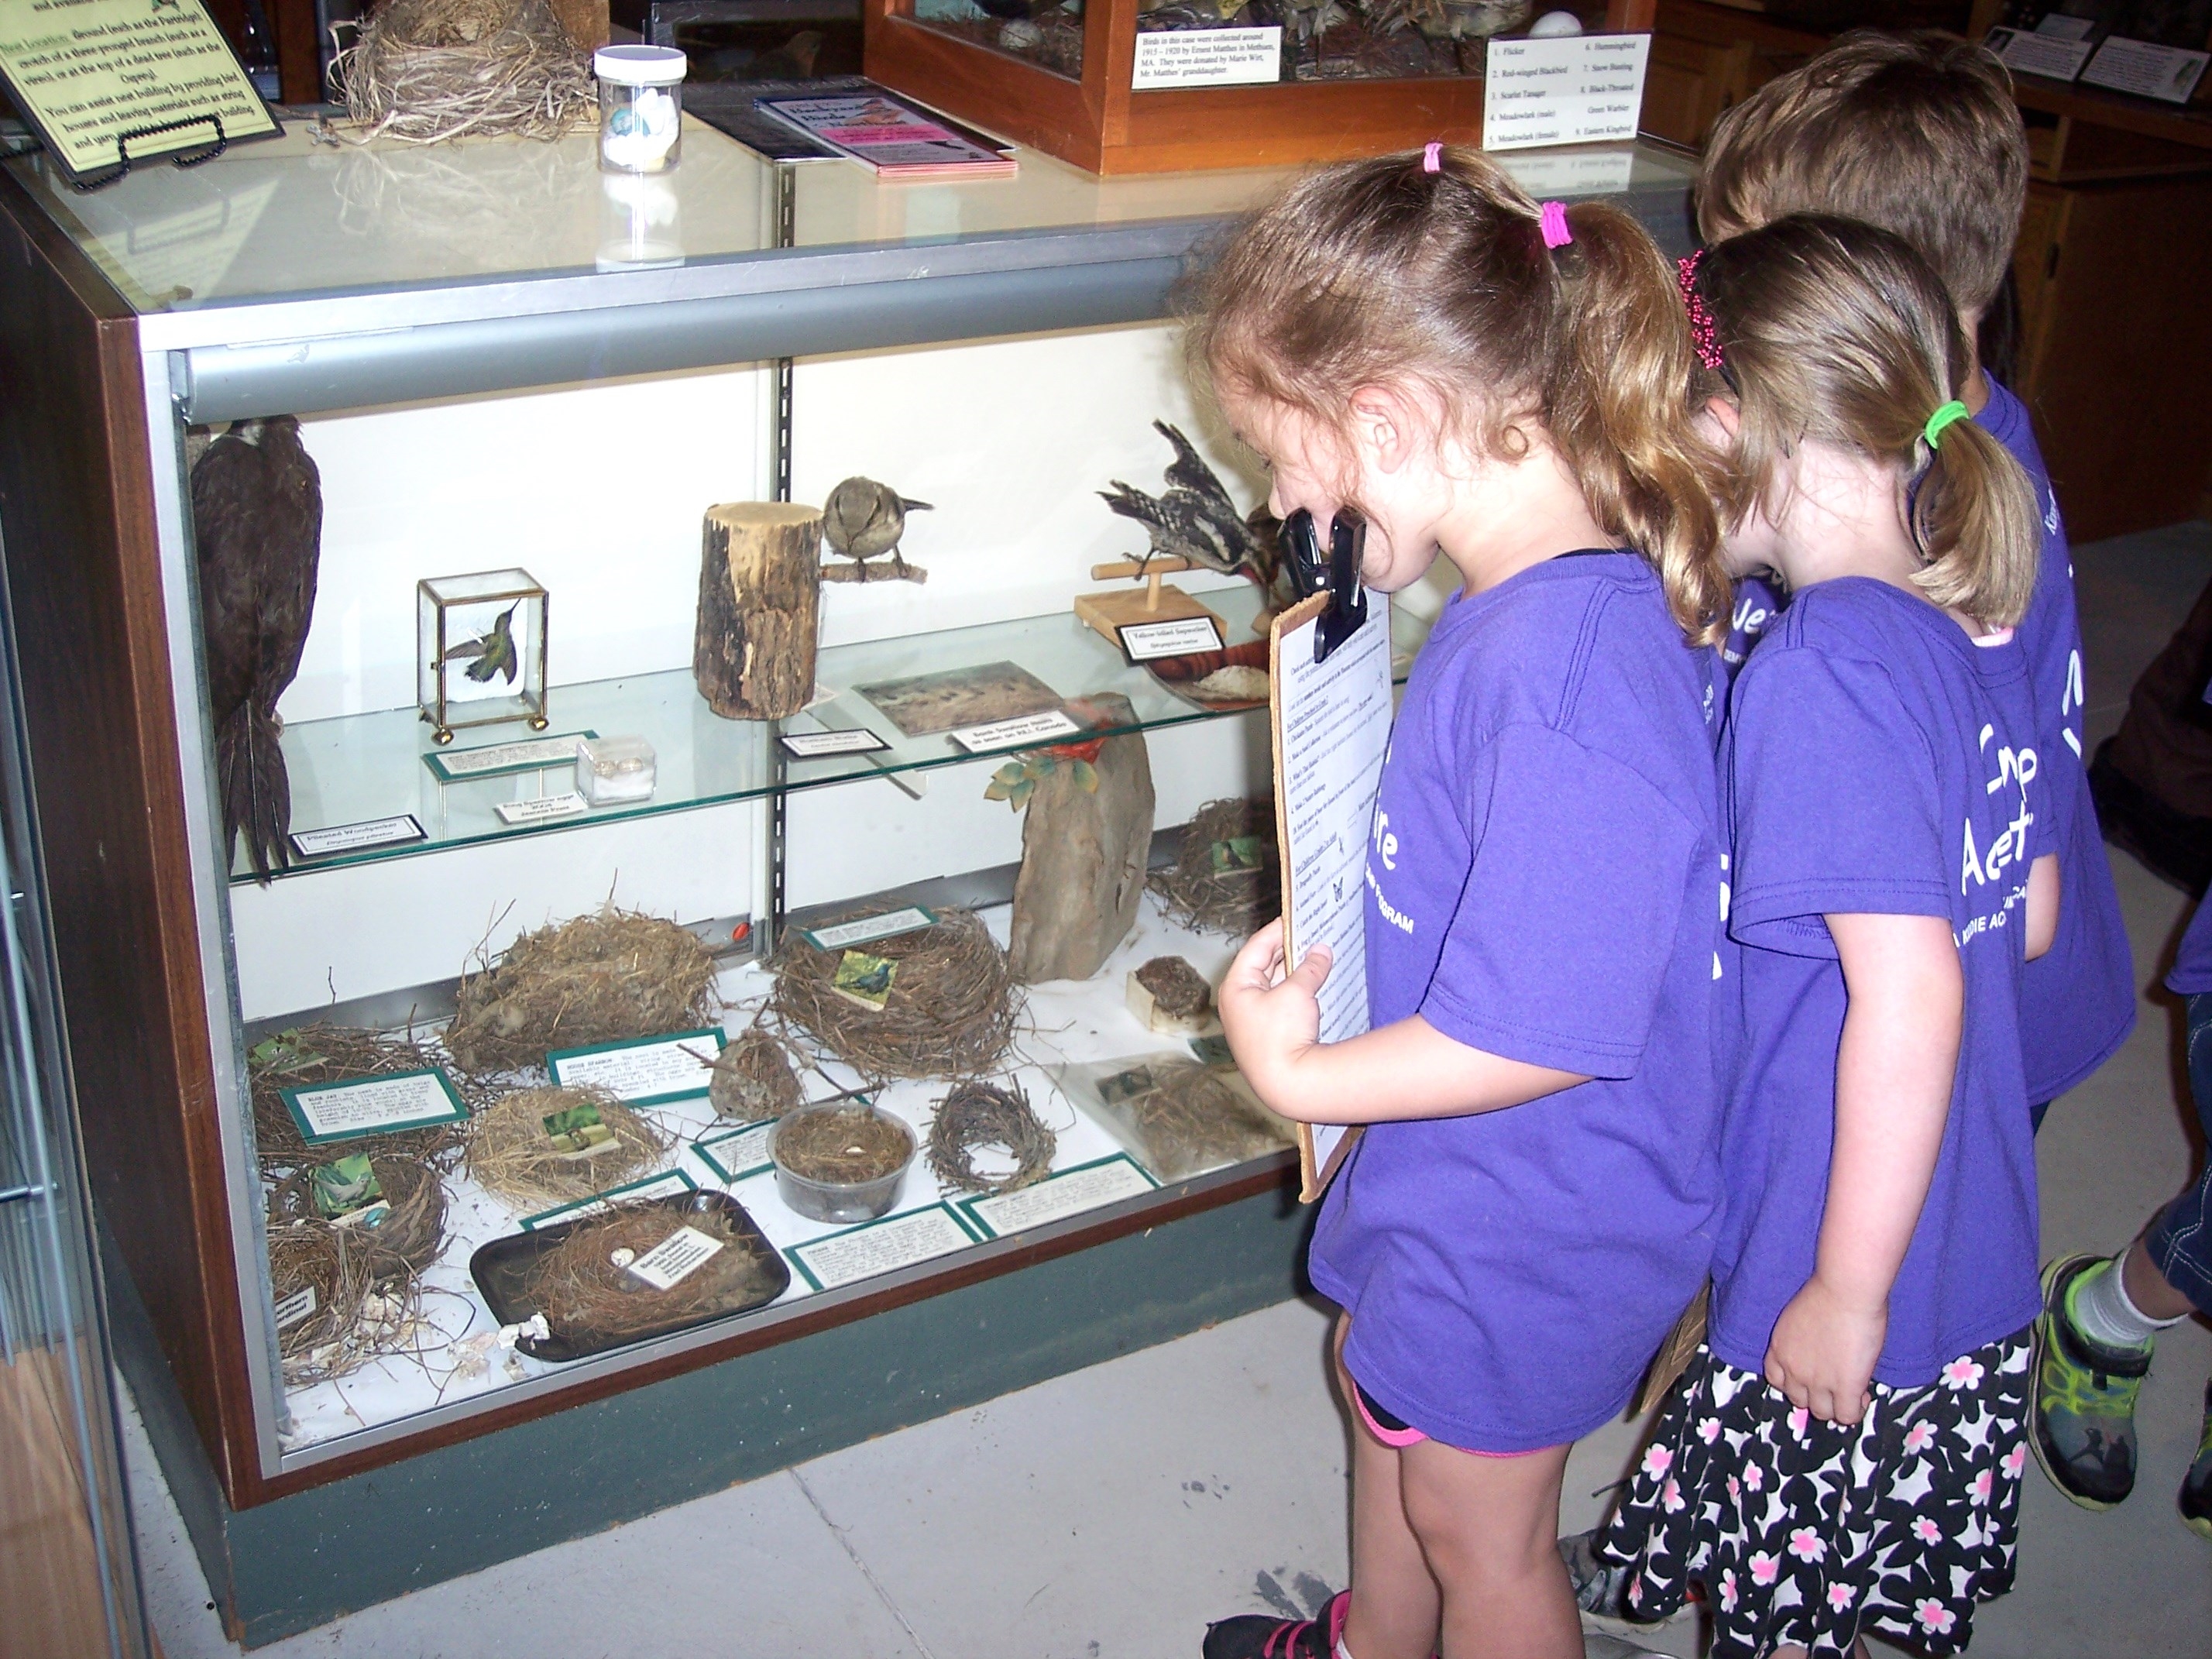 Nature Discovery Center